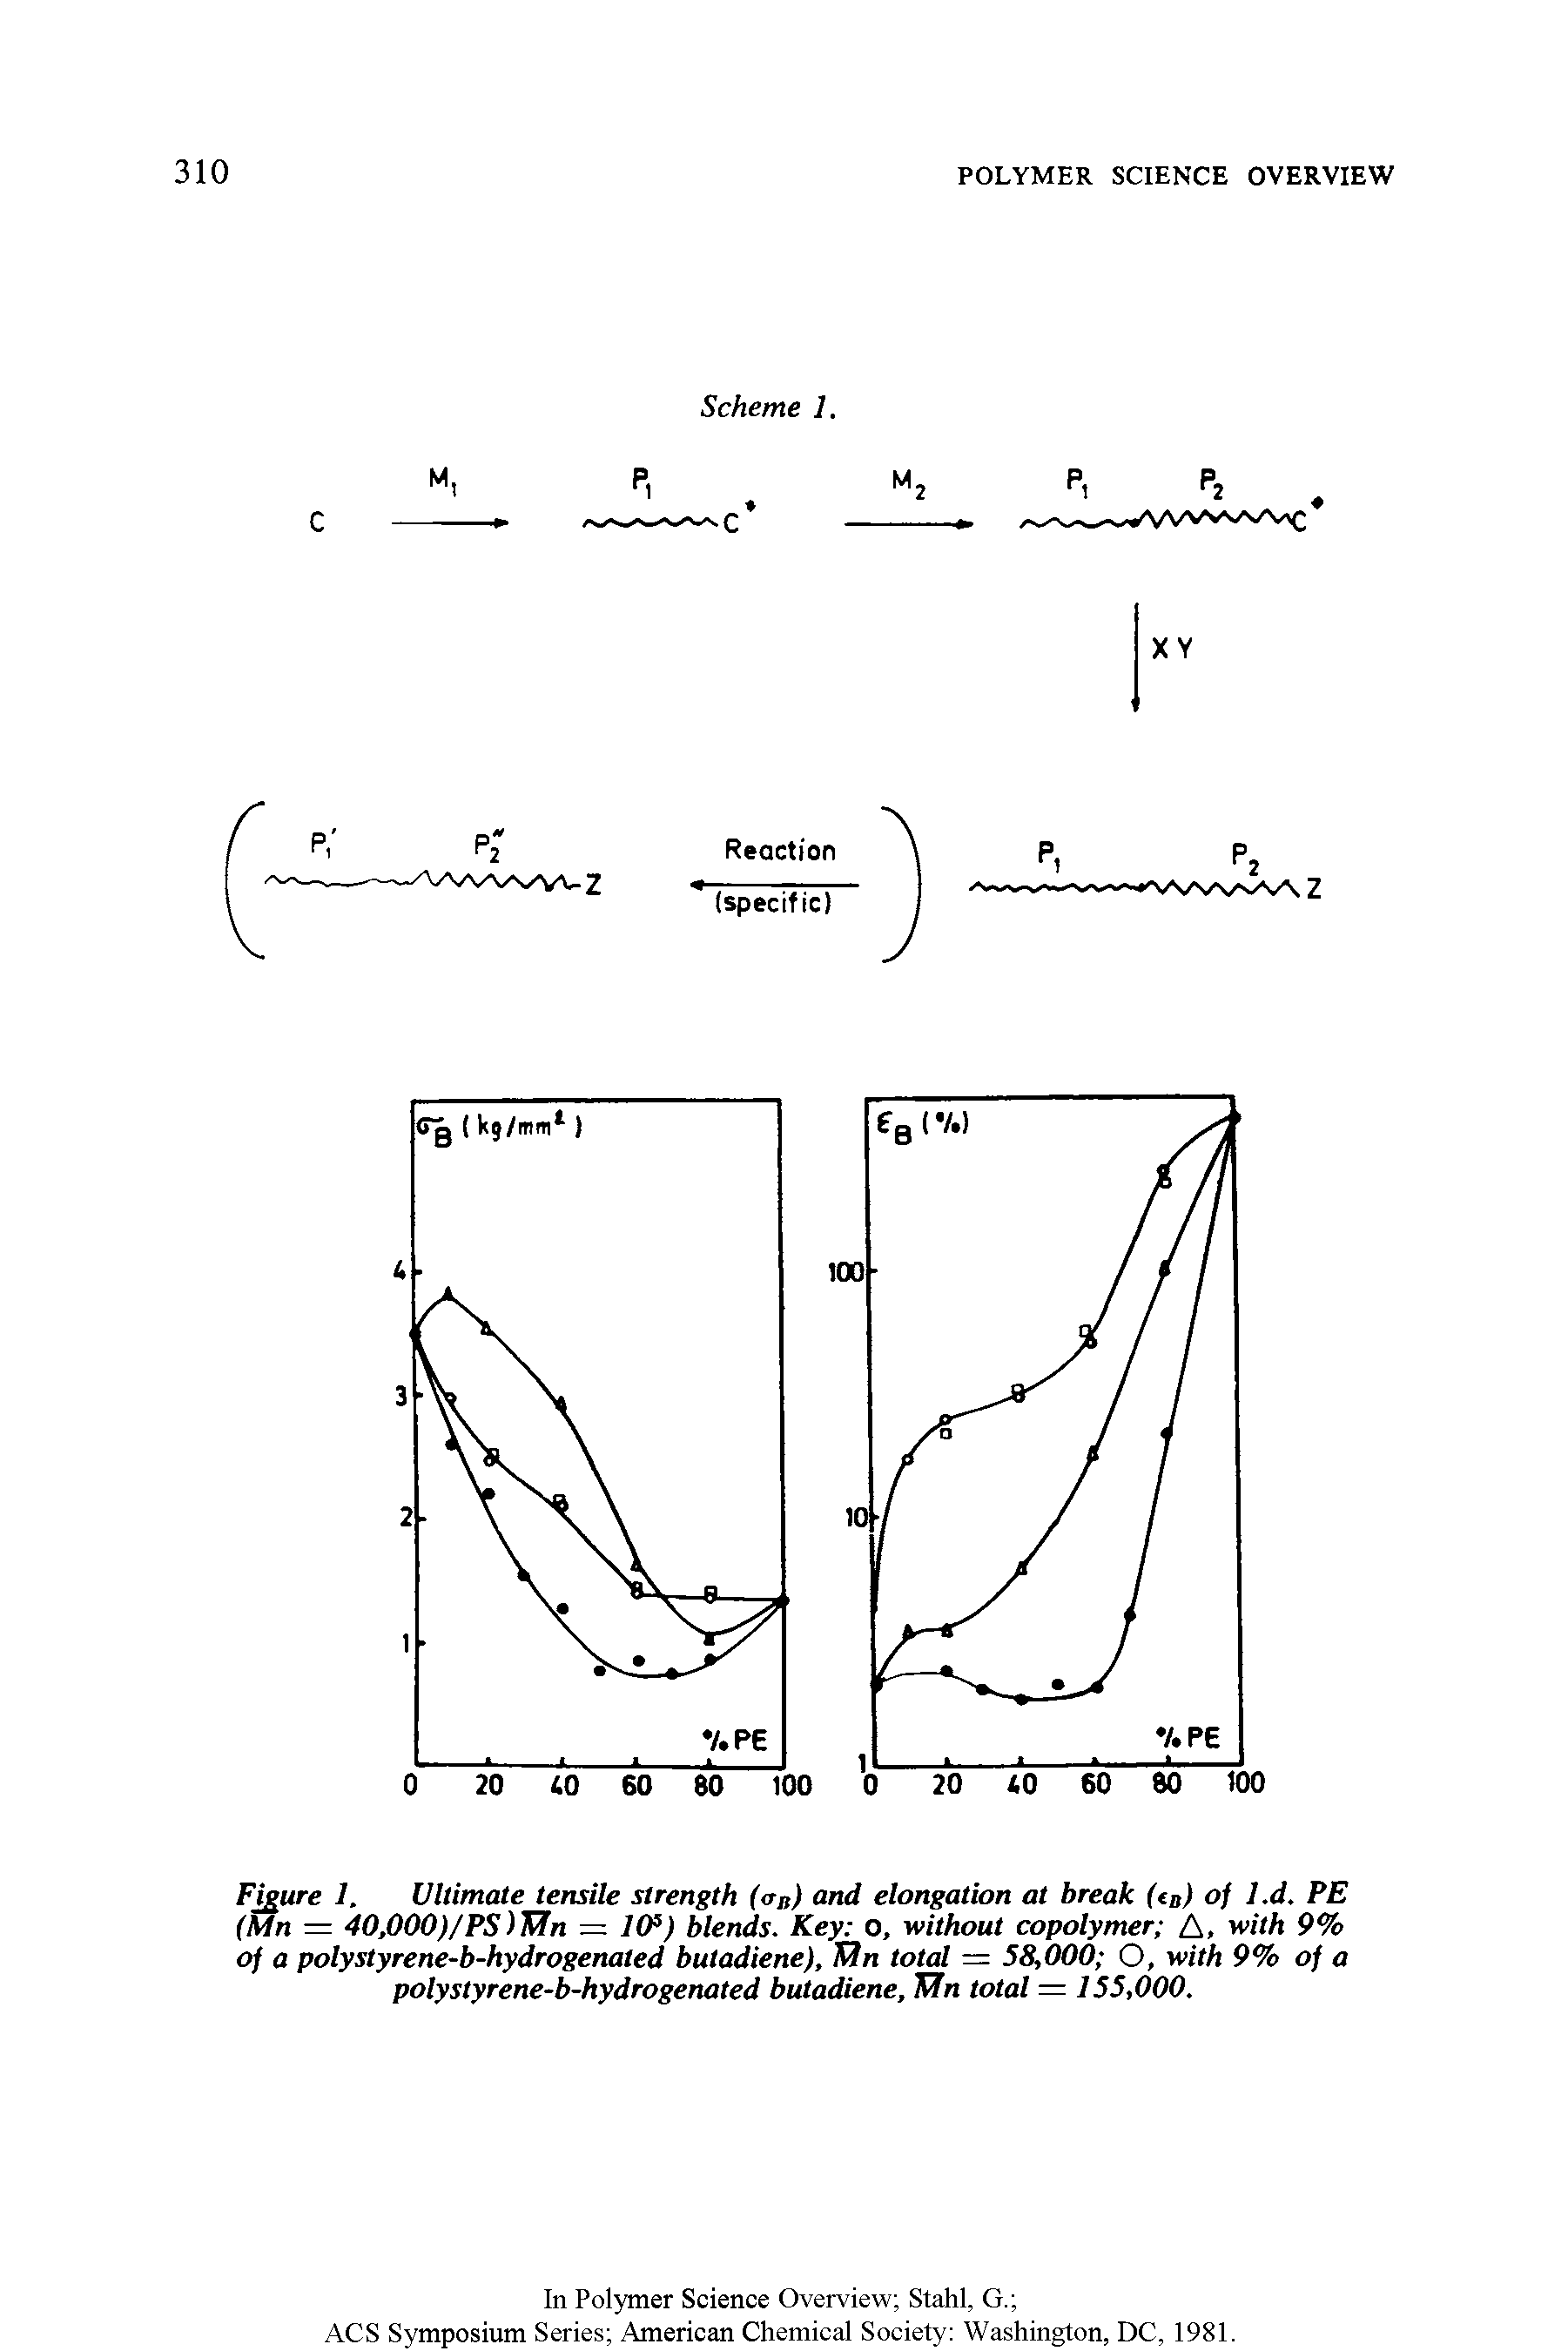 Figure 1. Ultimate tensile strength (<r ) and elongation at break (<B) of l.d. PE (Mn = 40,000)/PS)Mn = 10s) blends. Key o, without copolymer A, with 9% of a polystyrene-b-hydrogenated butadiene), Kin total = 58,000 O, with 9% of a polystyrene-b-hydrogenated butadiene, Mn total = 155,000.